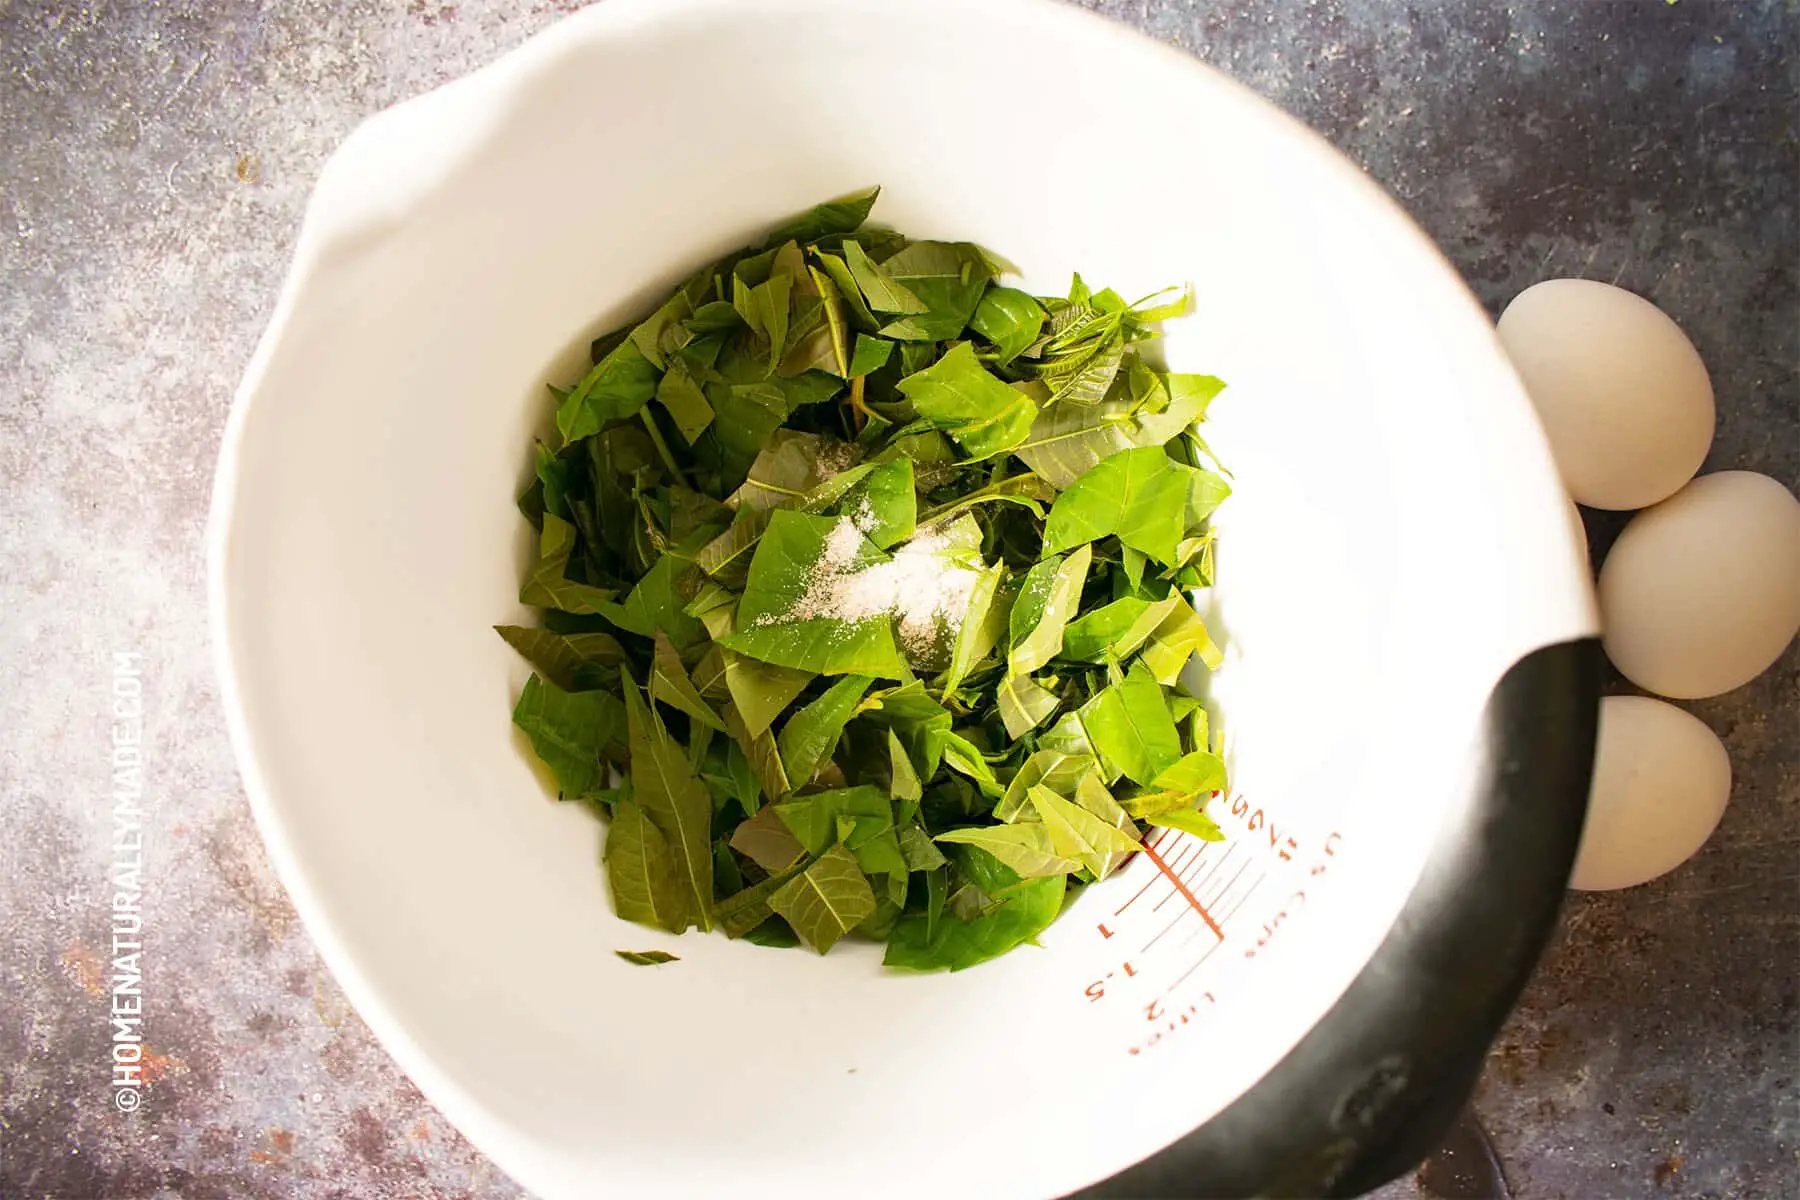 Chopped Xiang Chun leaves with a pinch of salt